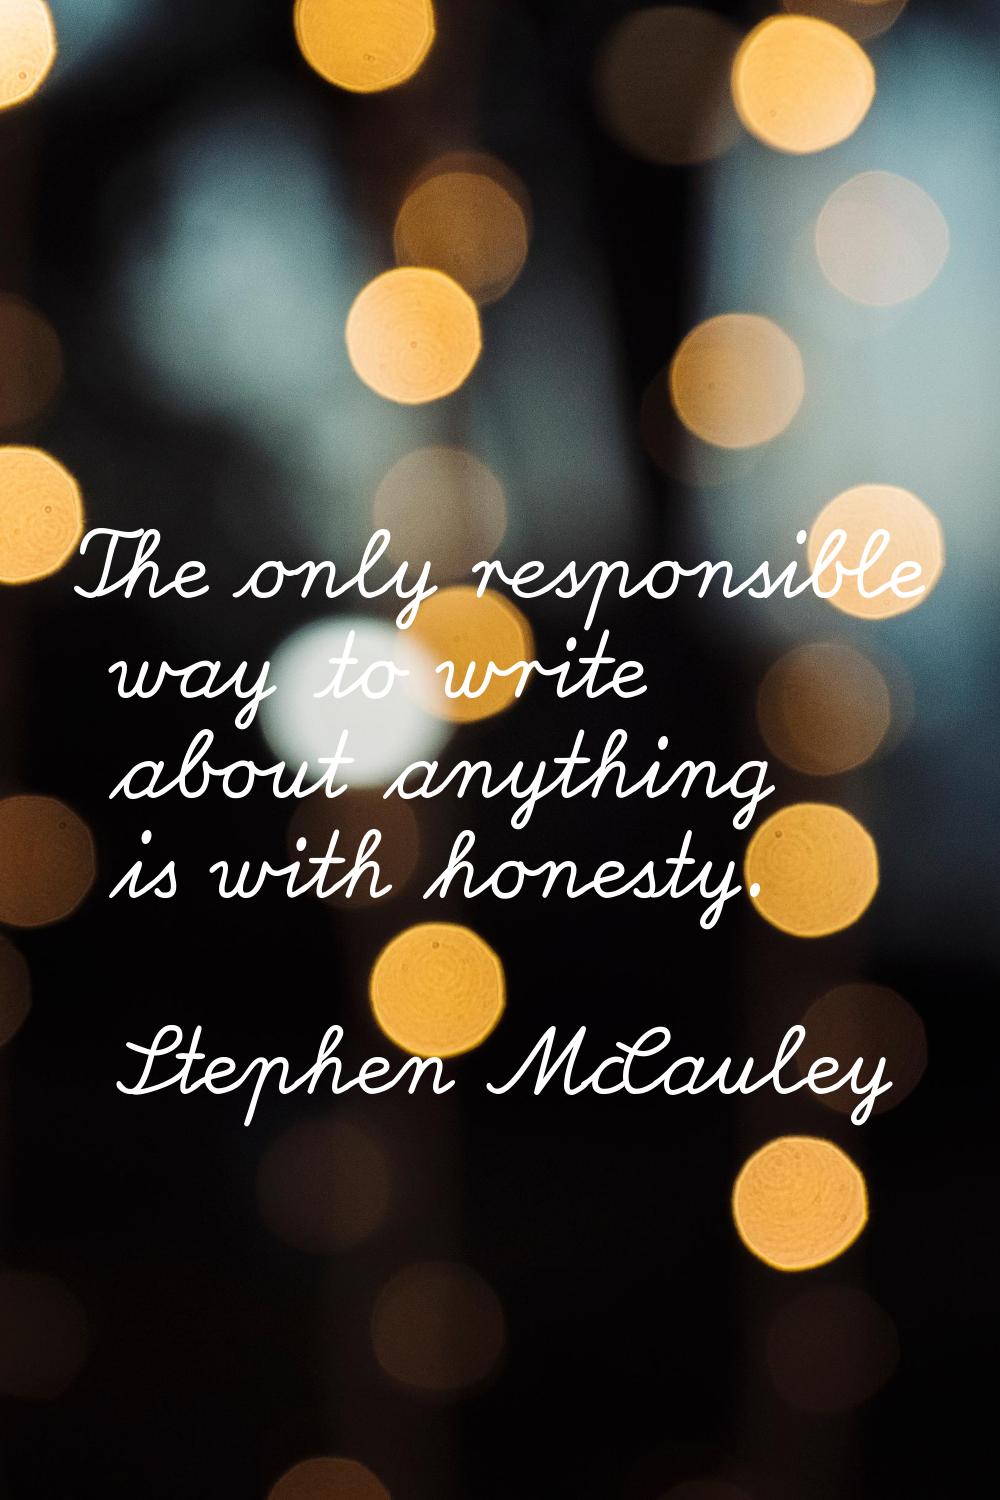 The only responsible way to write about anything is with honesty.